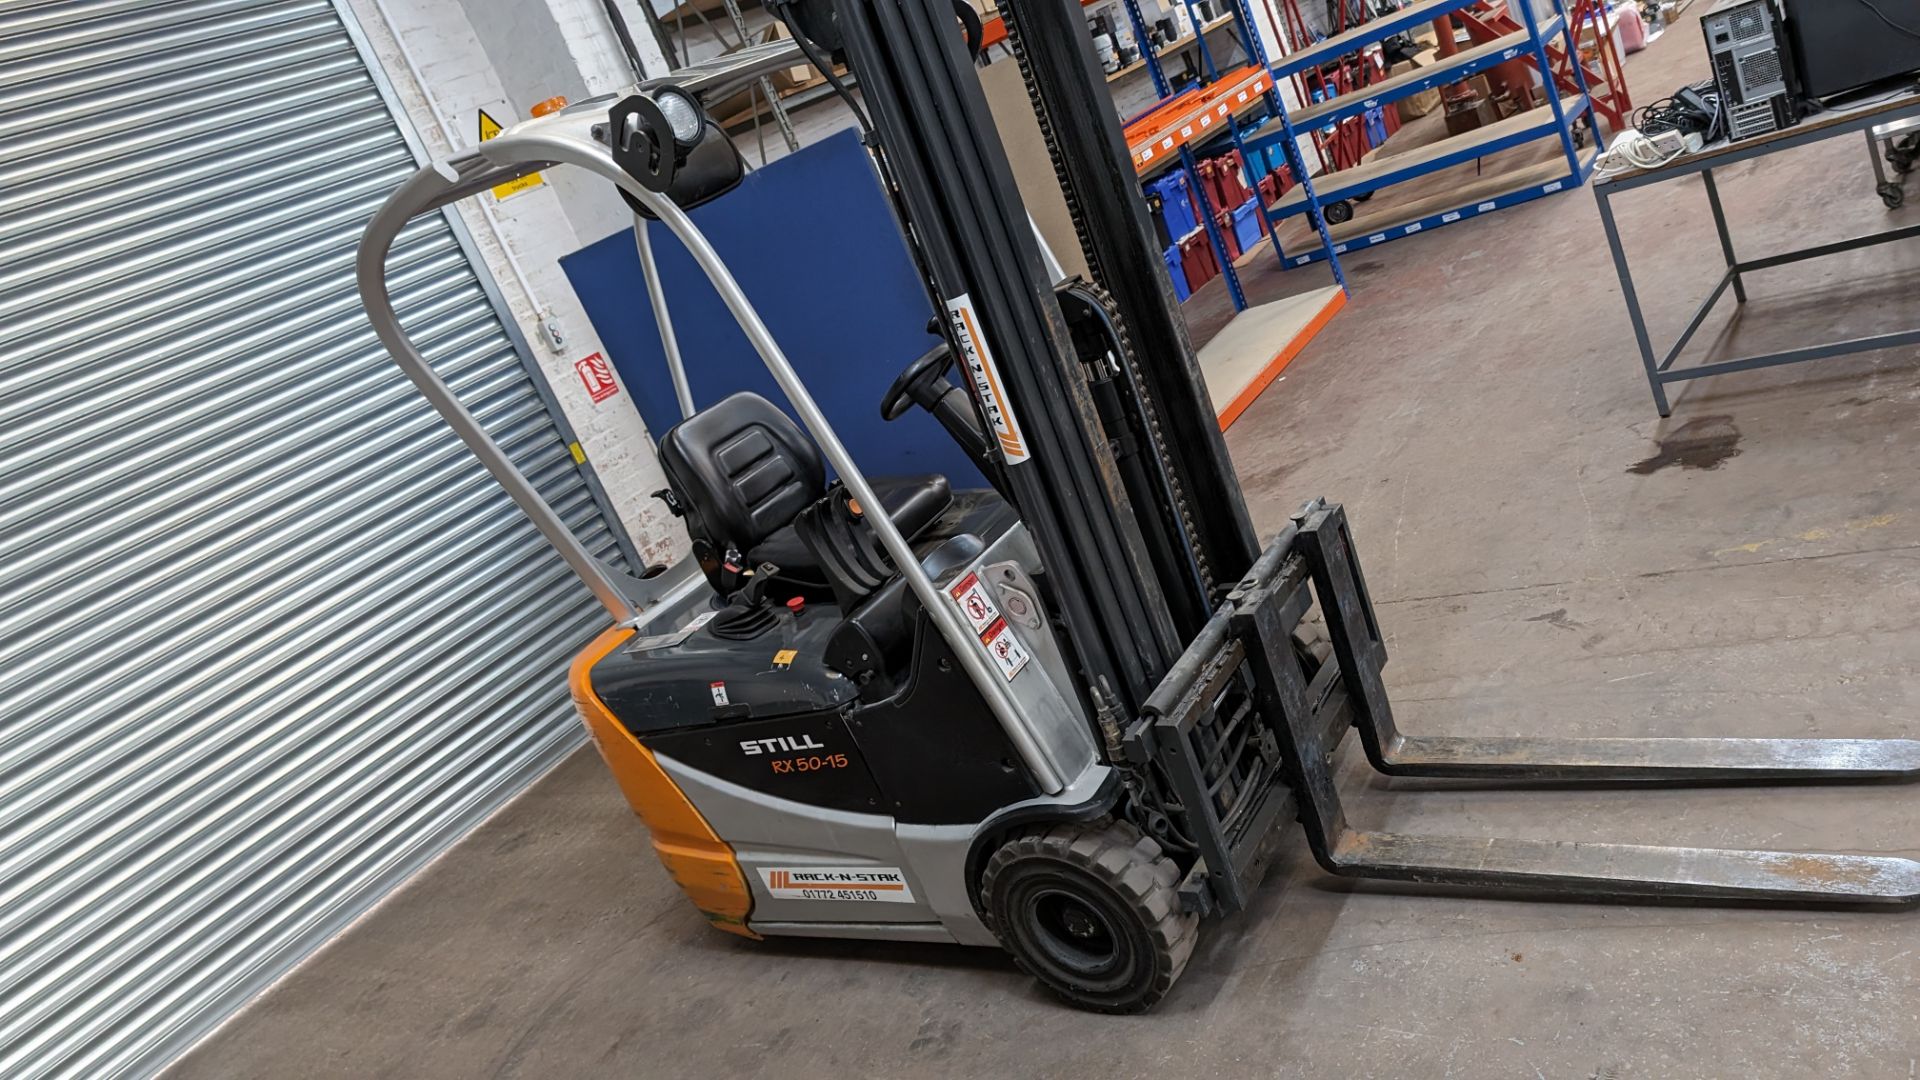 Still model RX-5015 3-wheel electric forklift truck with sideshift, 1.5 tonne capacity, including St - Bild 13 aus 18